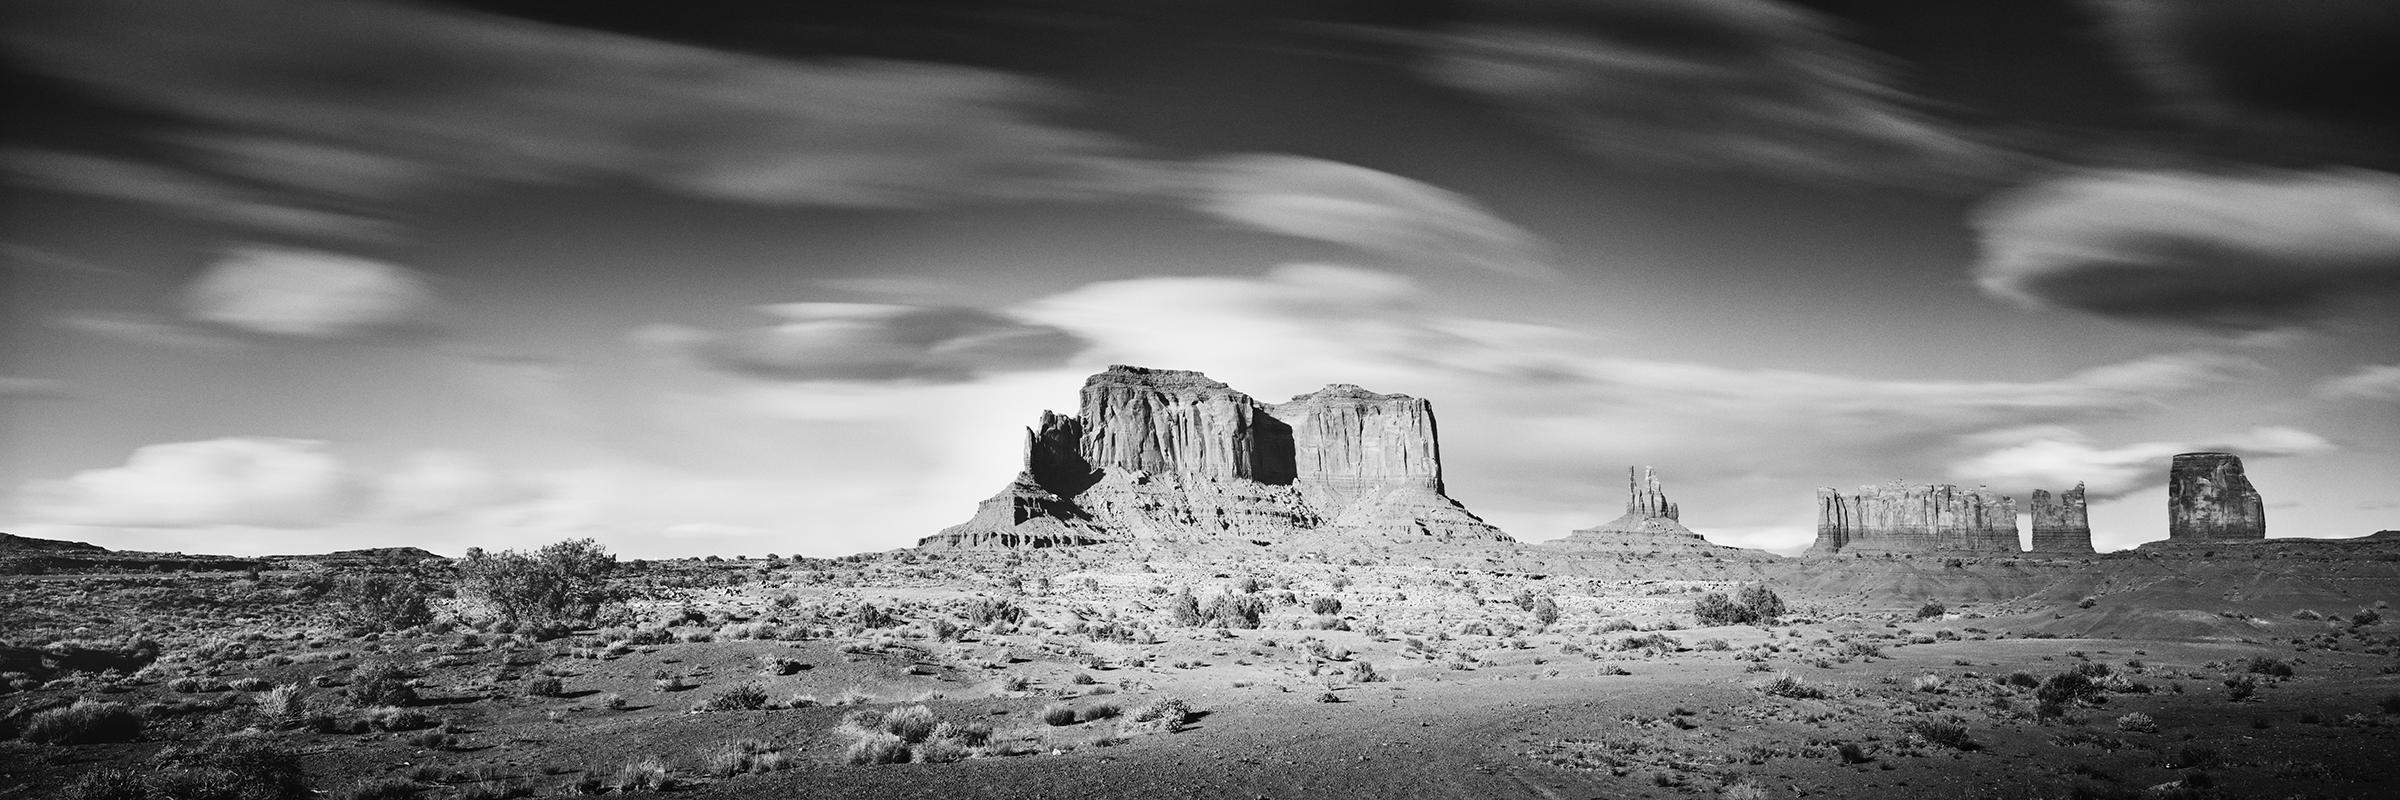 Gerald Berghammer Black and White Photograph - Wild West Panorama monument valley Utah USA black & white fine art photography